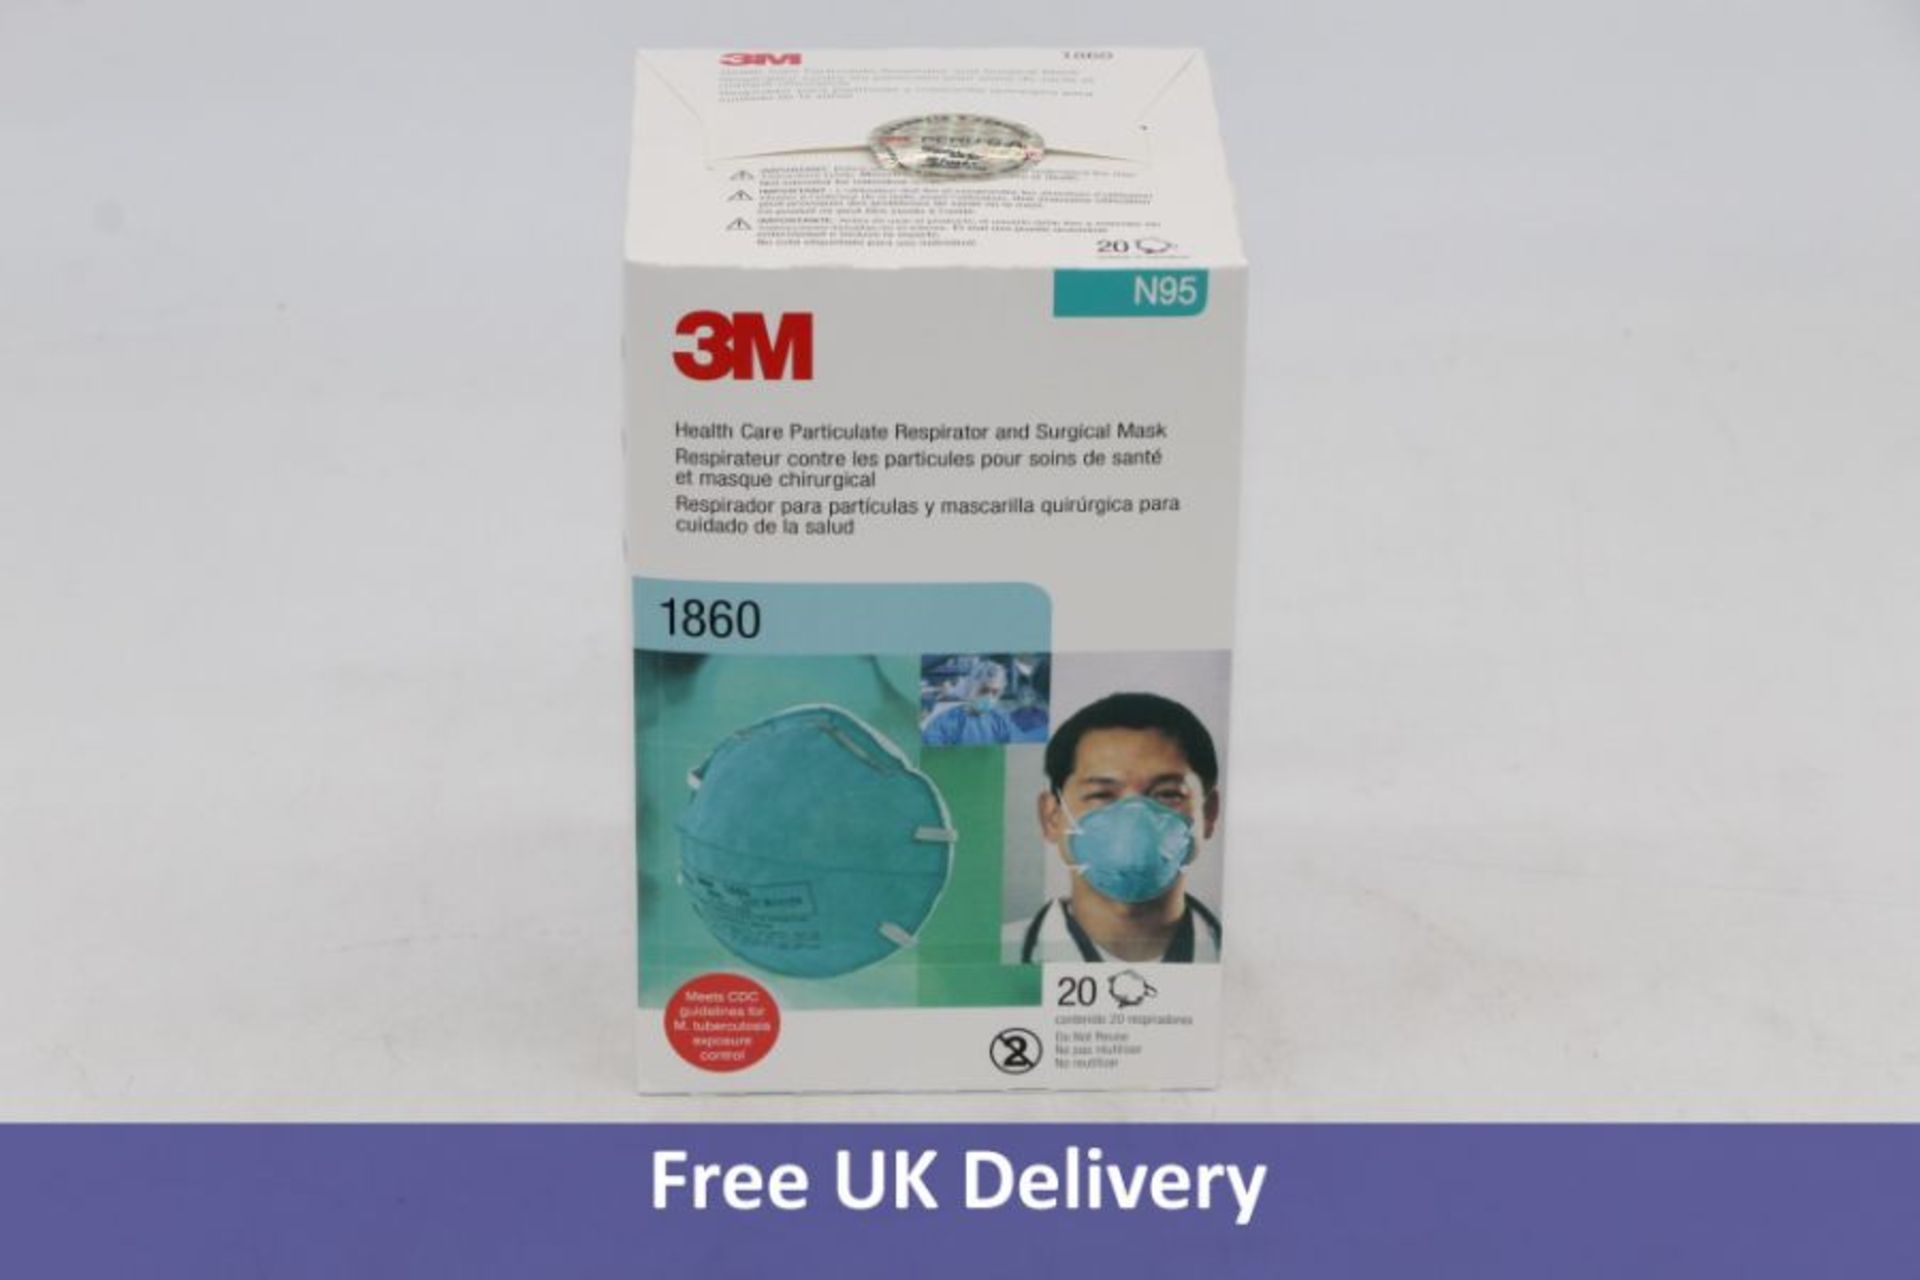 Twelve 3M Health Care Particulate Respirator And Surgical Masks, Packs Of Twenty, LOT B20138, Expiry